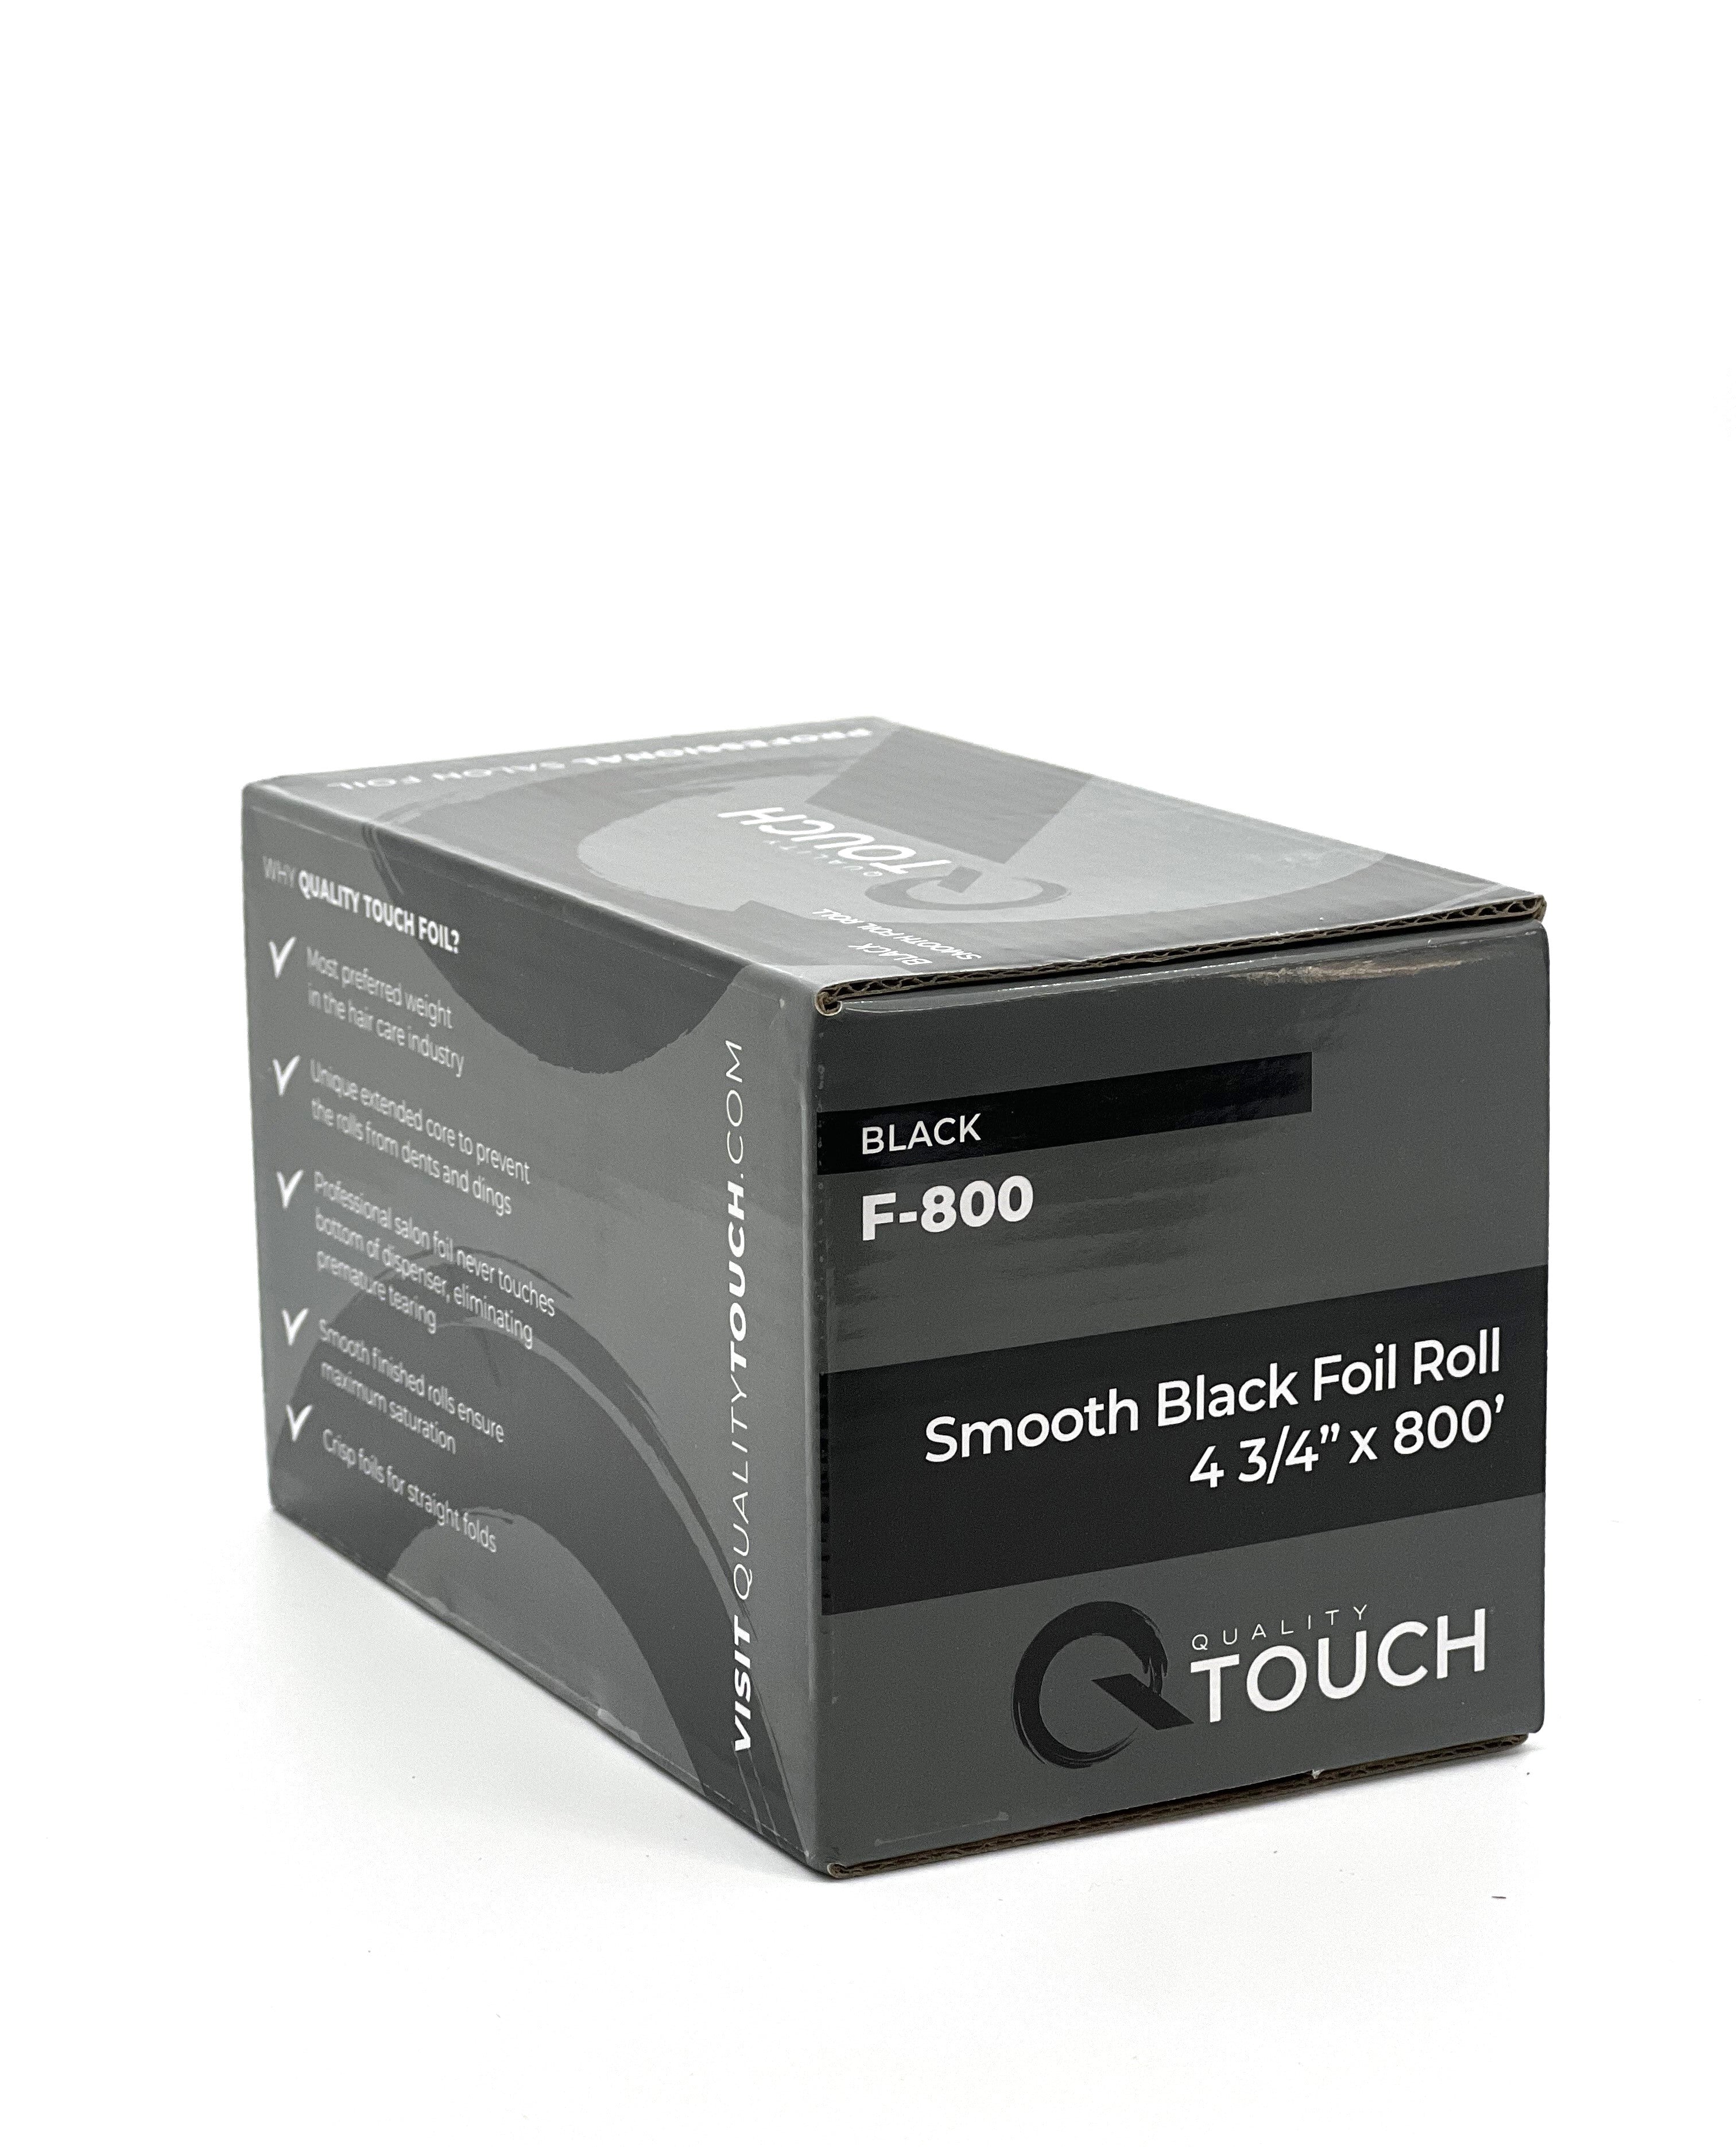 Professional Highlighting Foil for Hairstylists - Black  | #1 Rolled Foil from Quality Touch